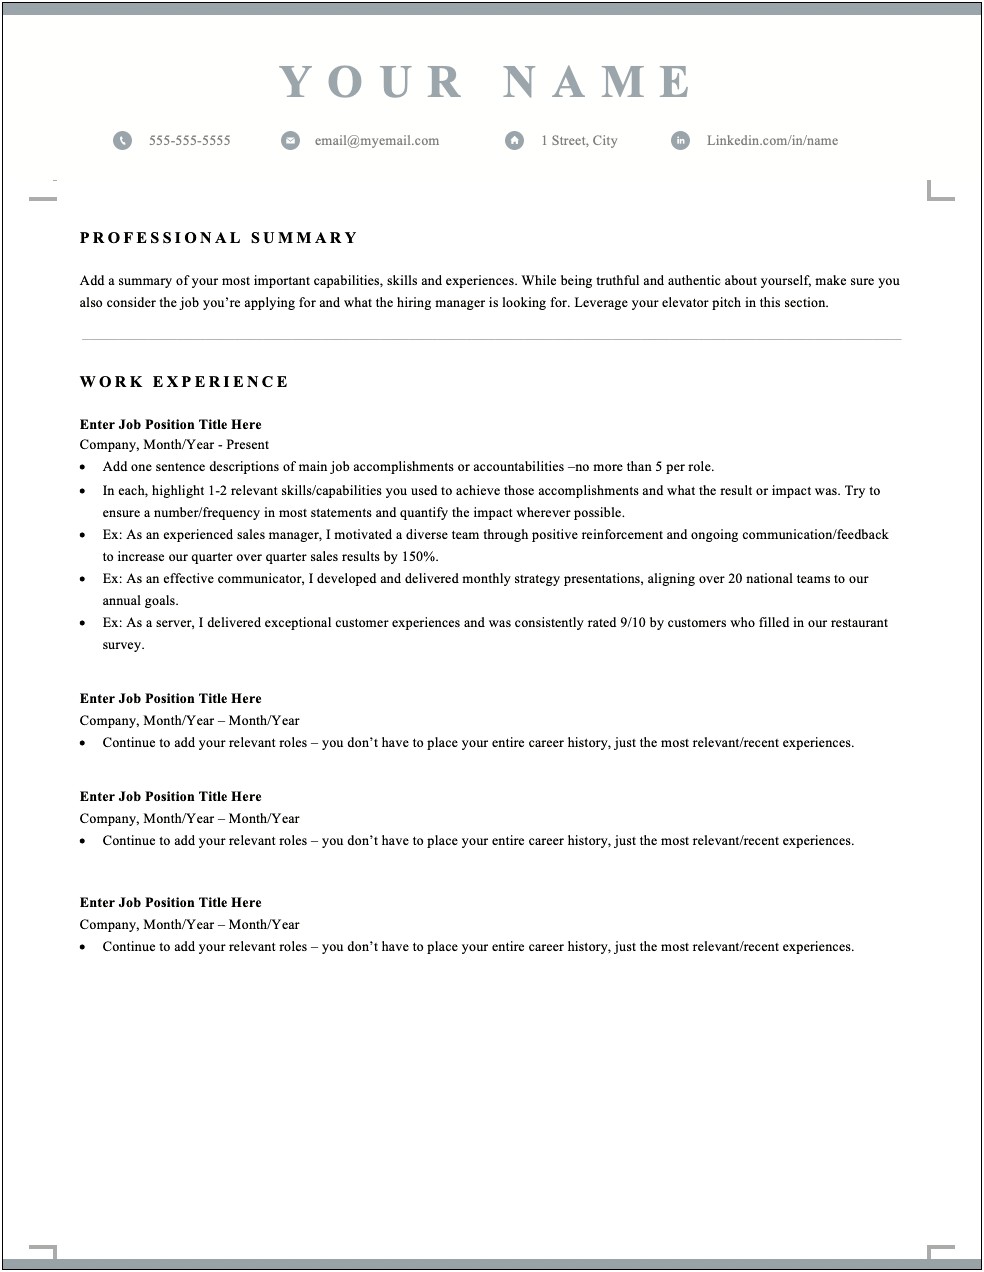 Sample Cover Letter For Resume Canada